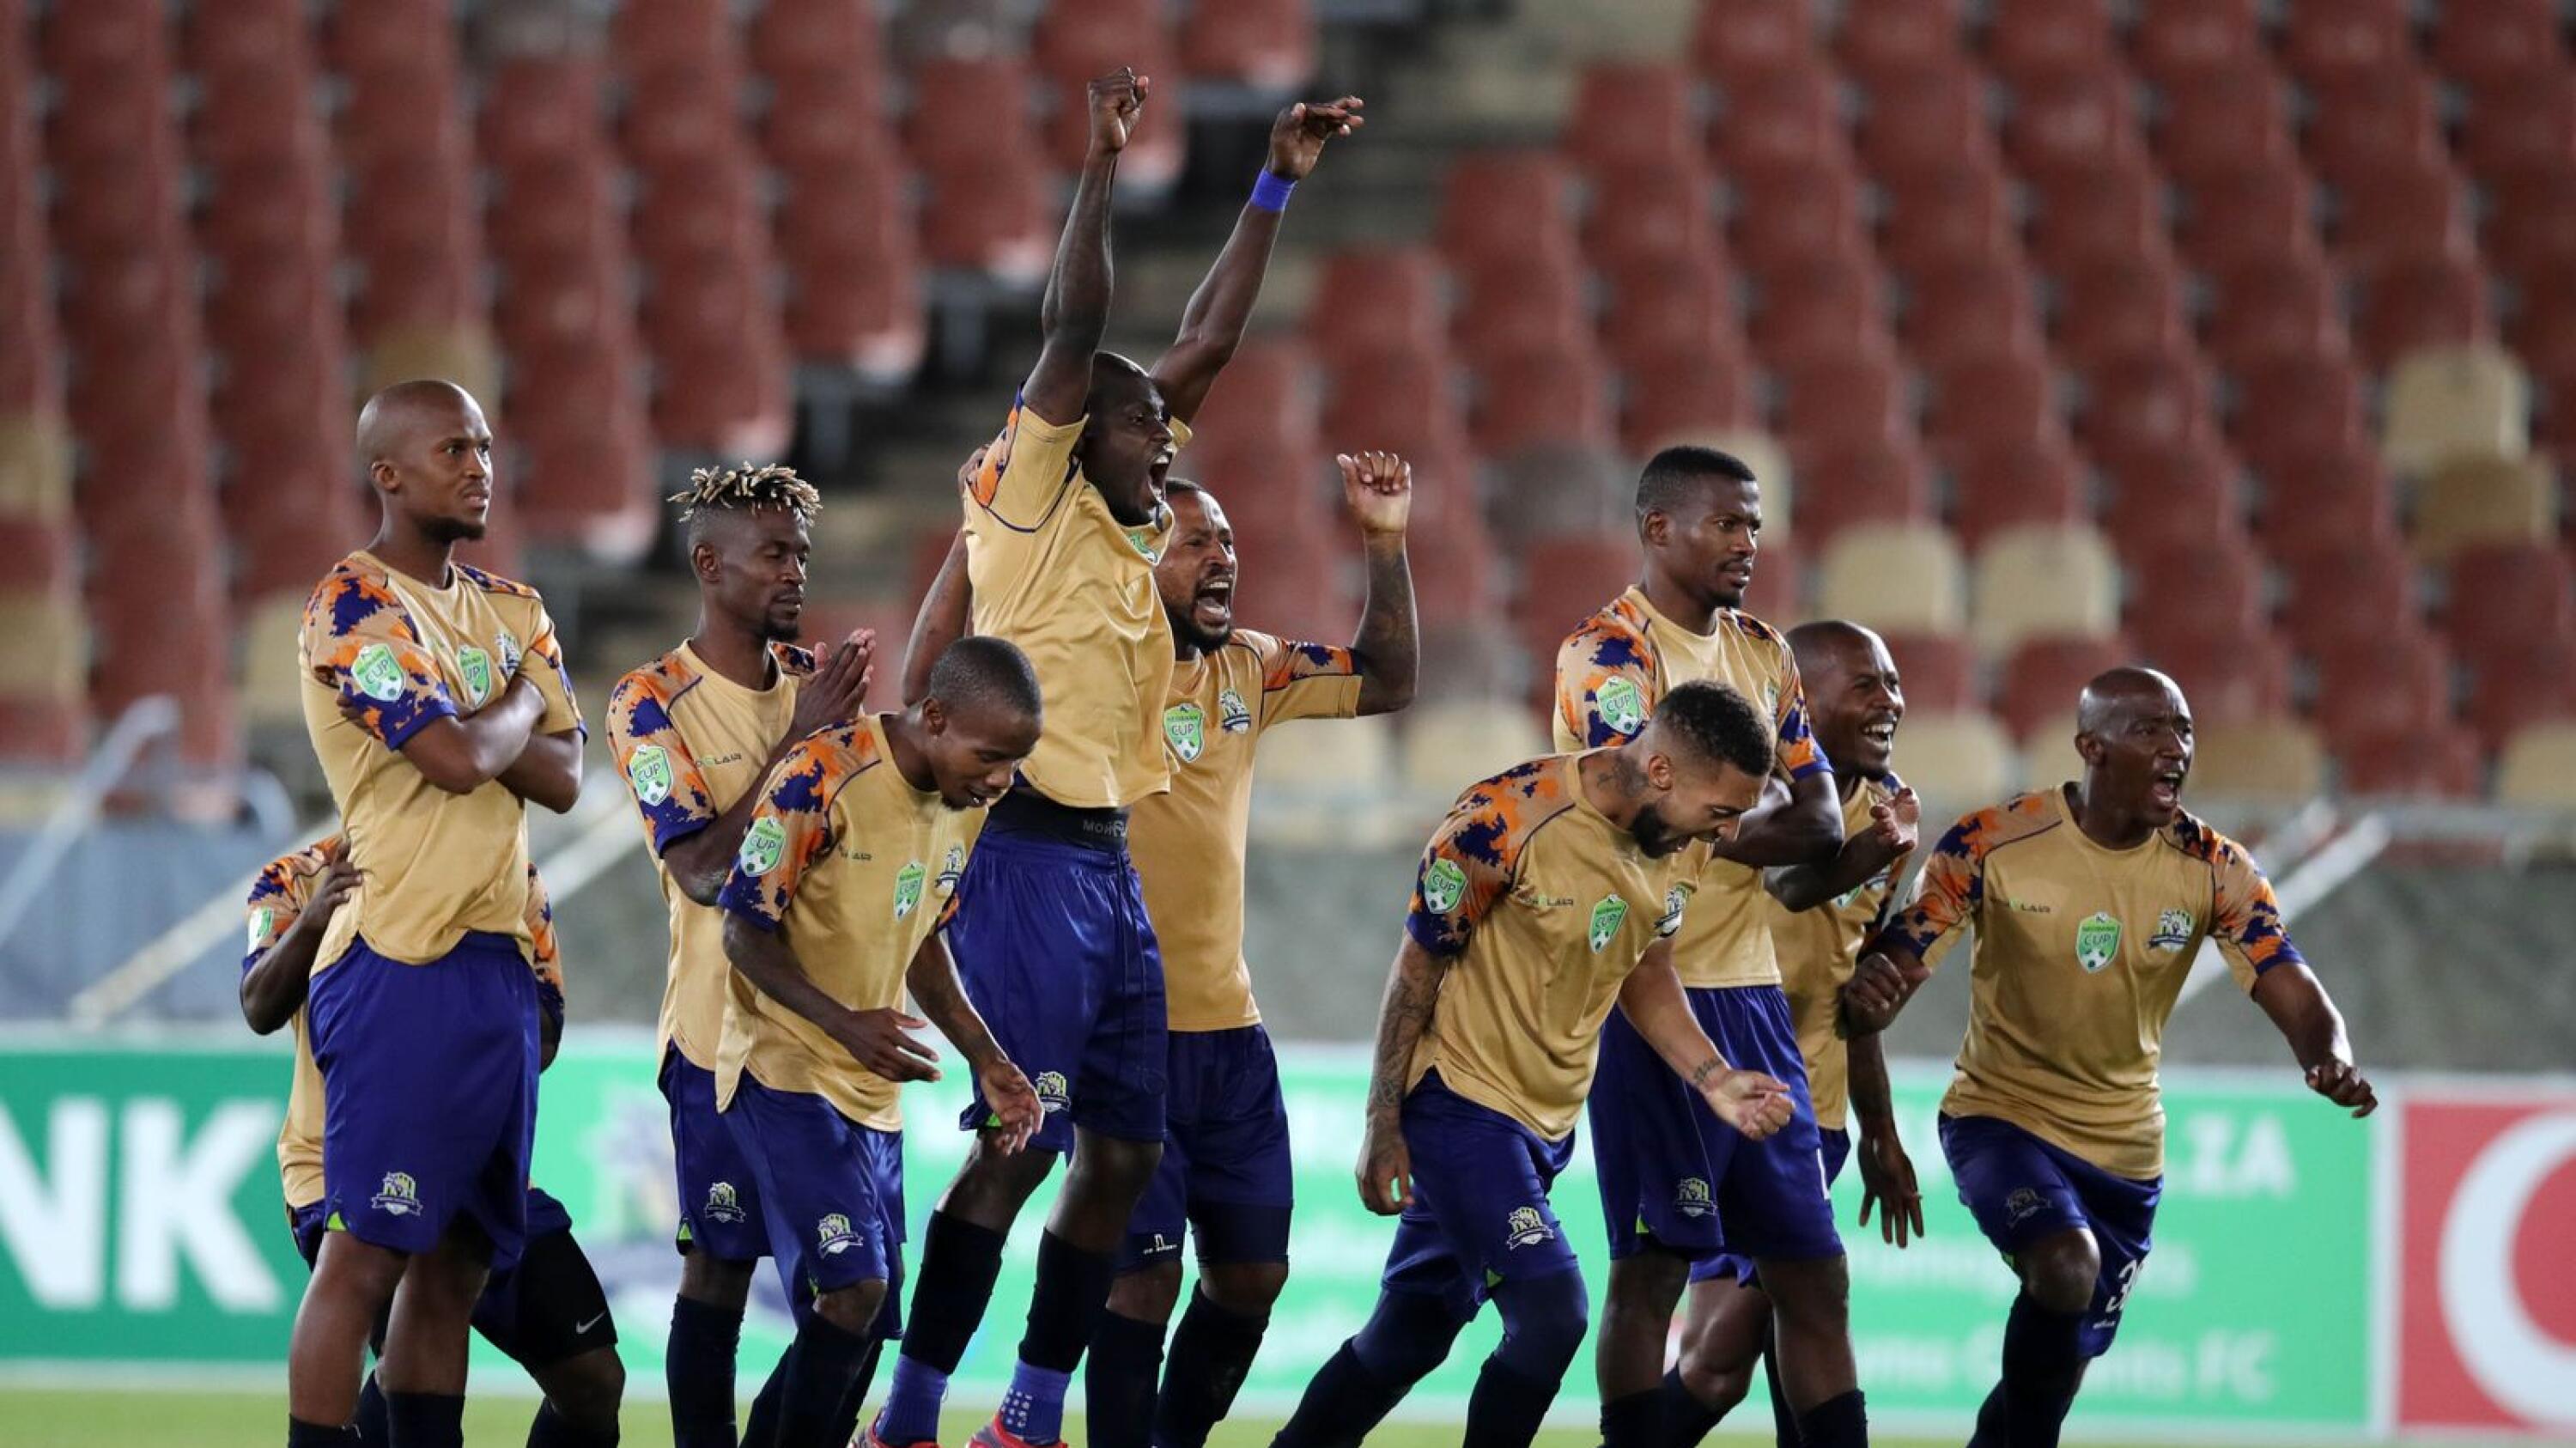 Marumo Gallants players celebrate after winning their penalty shootout to dump Orlando Pirates out of the Nedbank Cup at Peter Mokaba Stadium in Polokwane on Wednesday